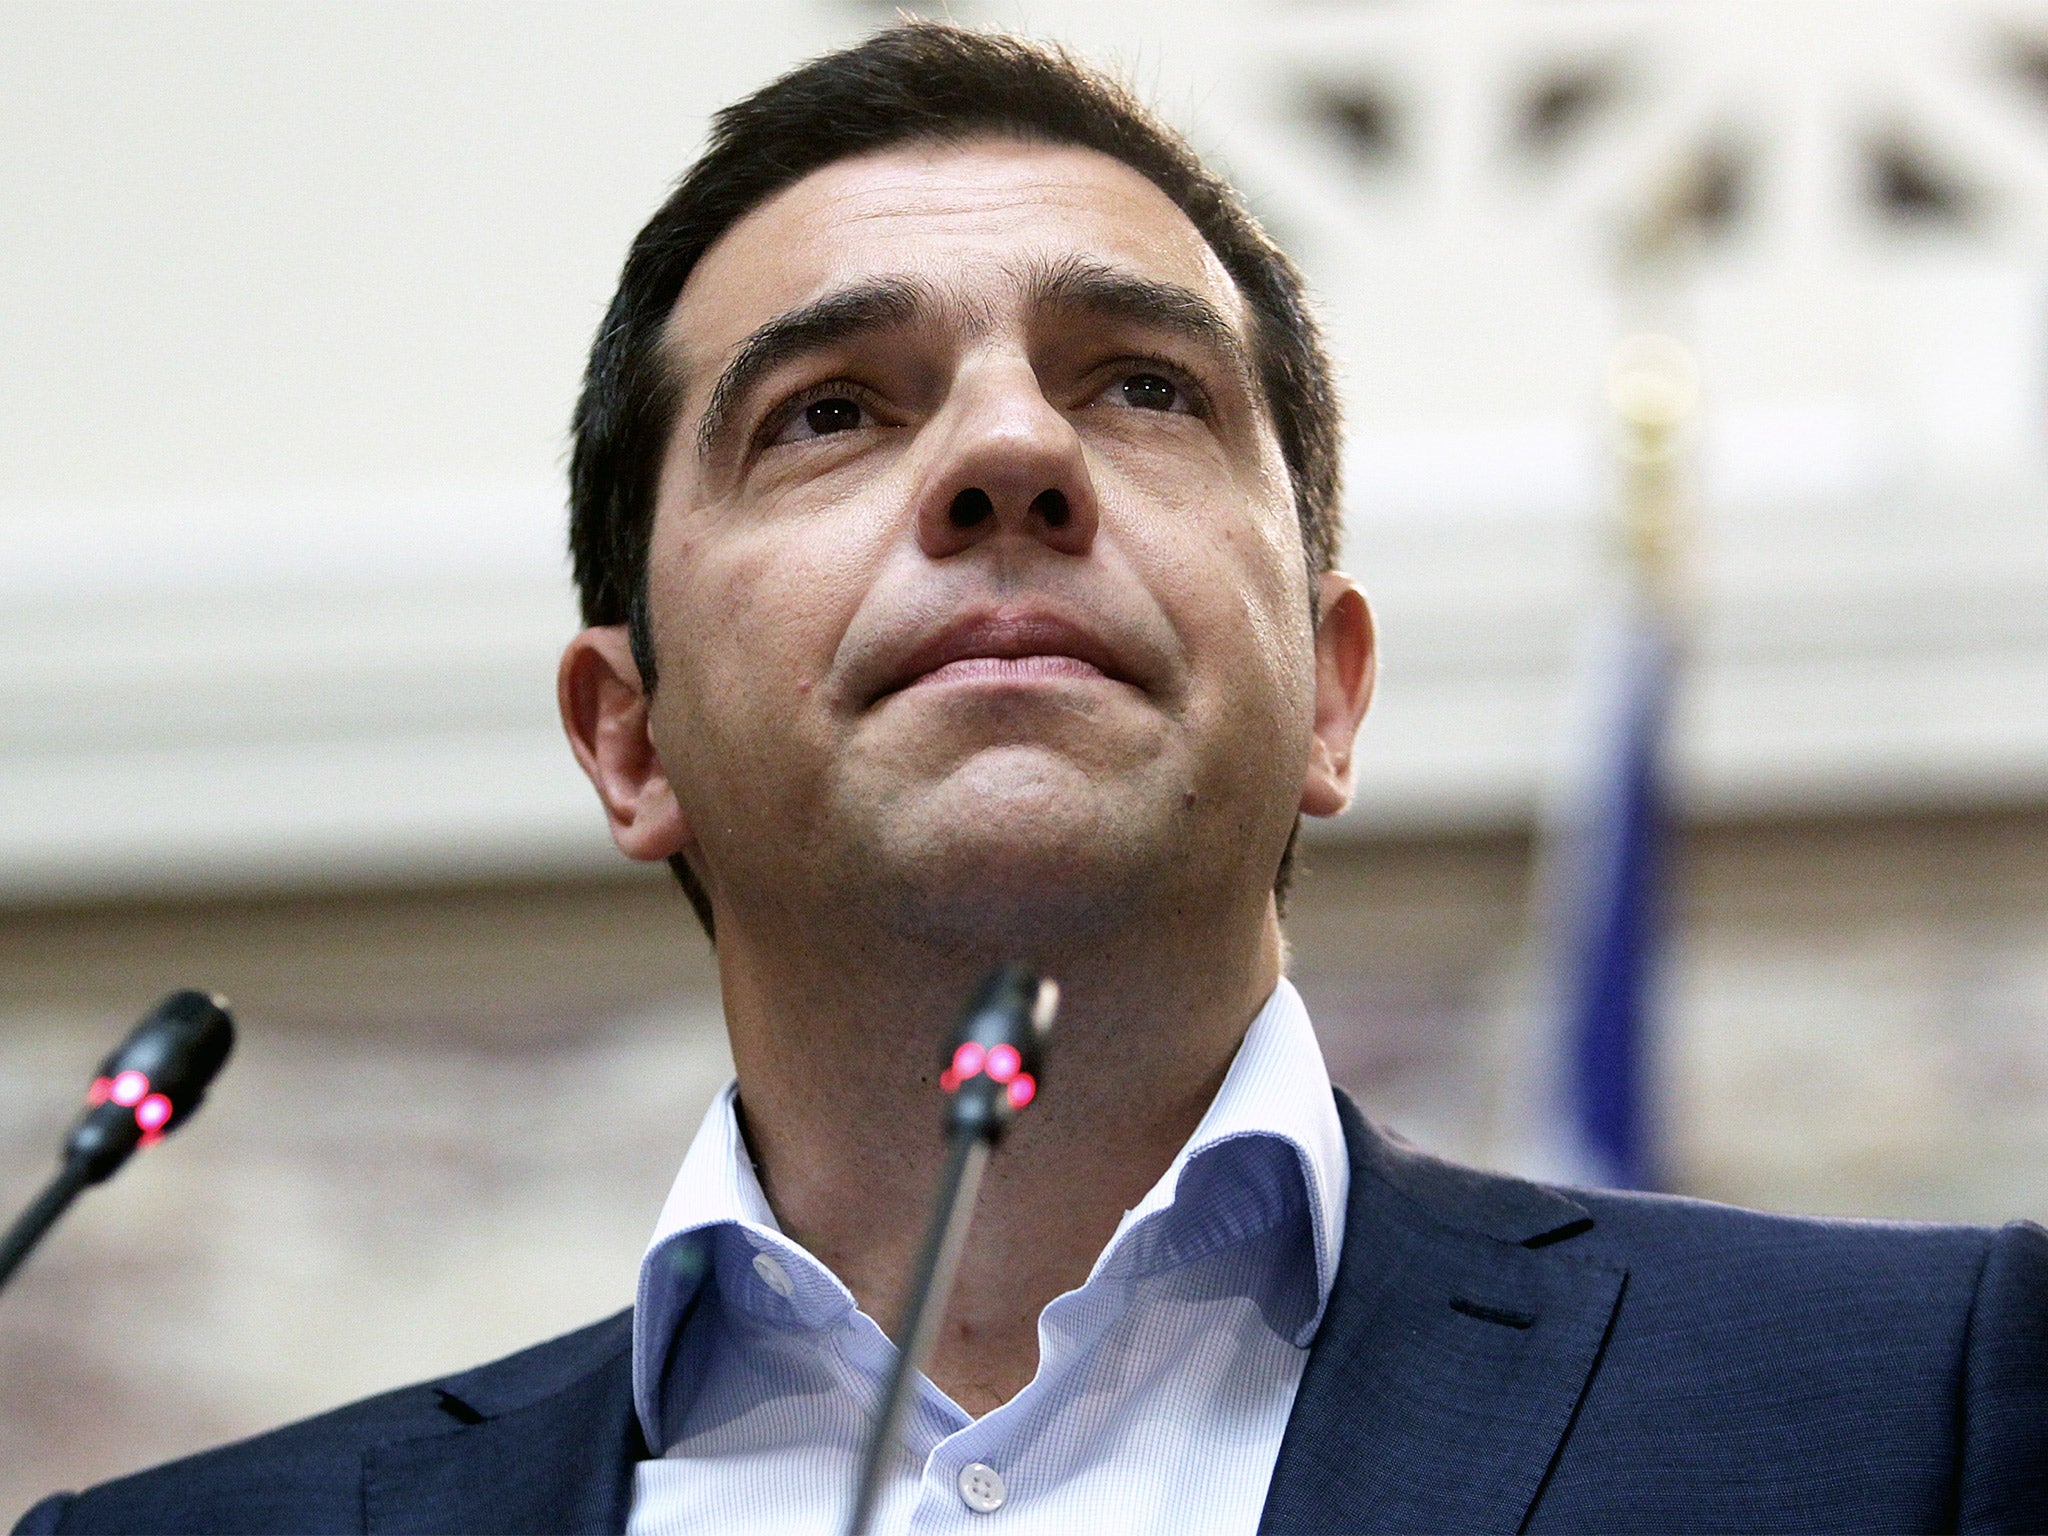 Alexis Tsipras, the Greek Prime Minister, said bailout conditions had ‘asphyxiated’ his country